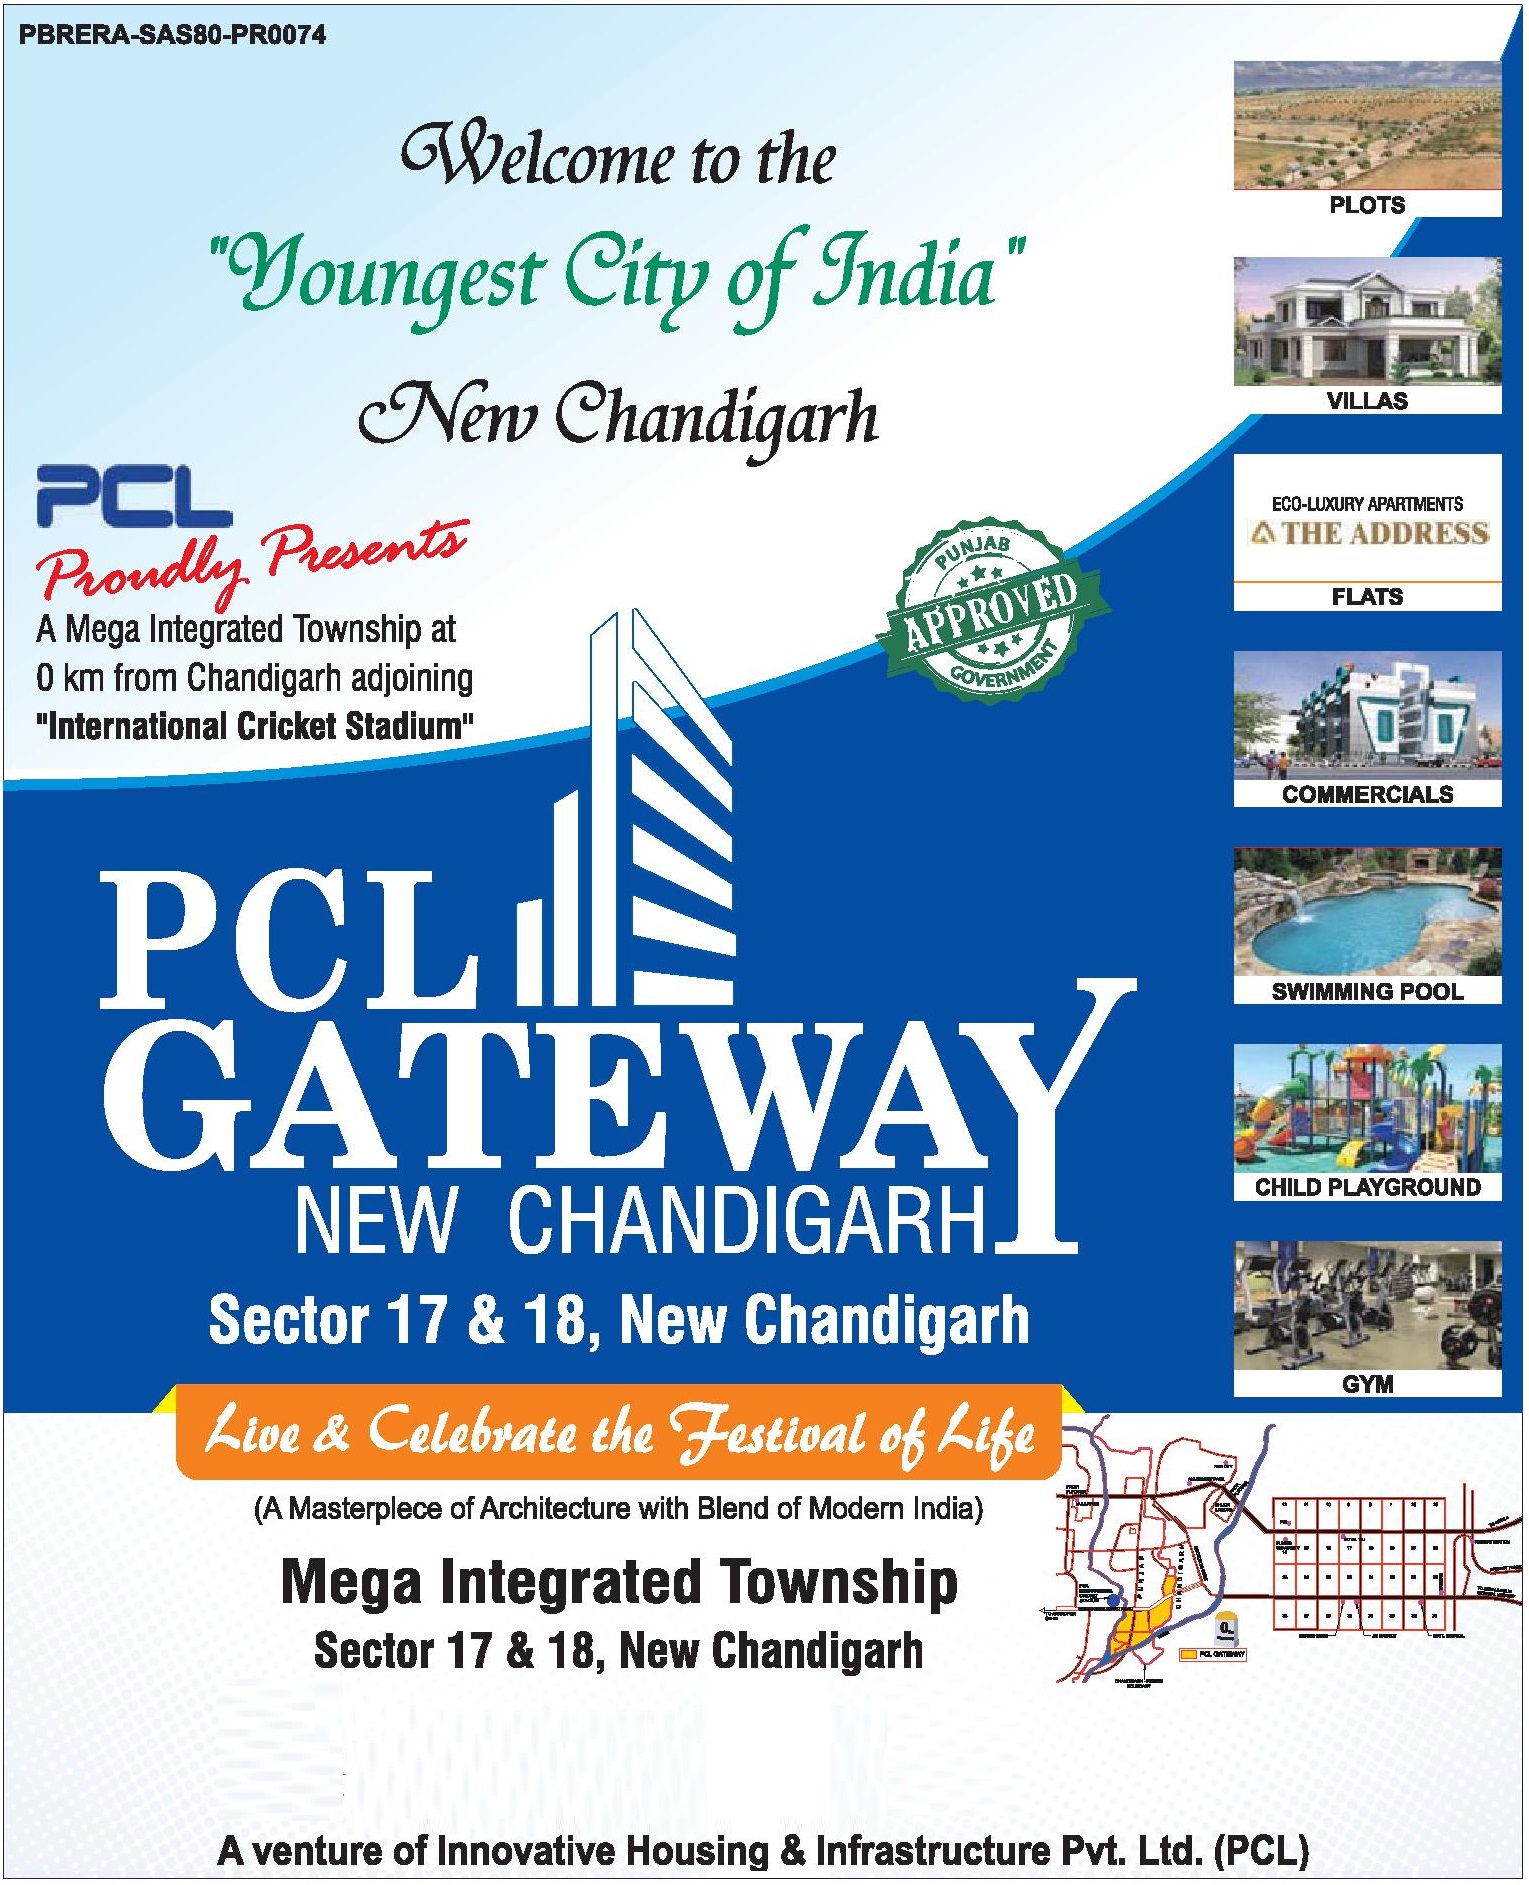 Invest at PCL Gateway in Chandigarh Update